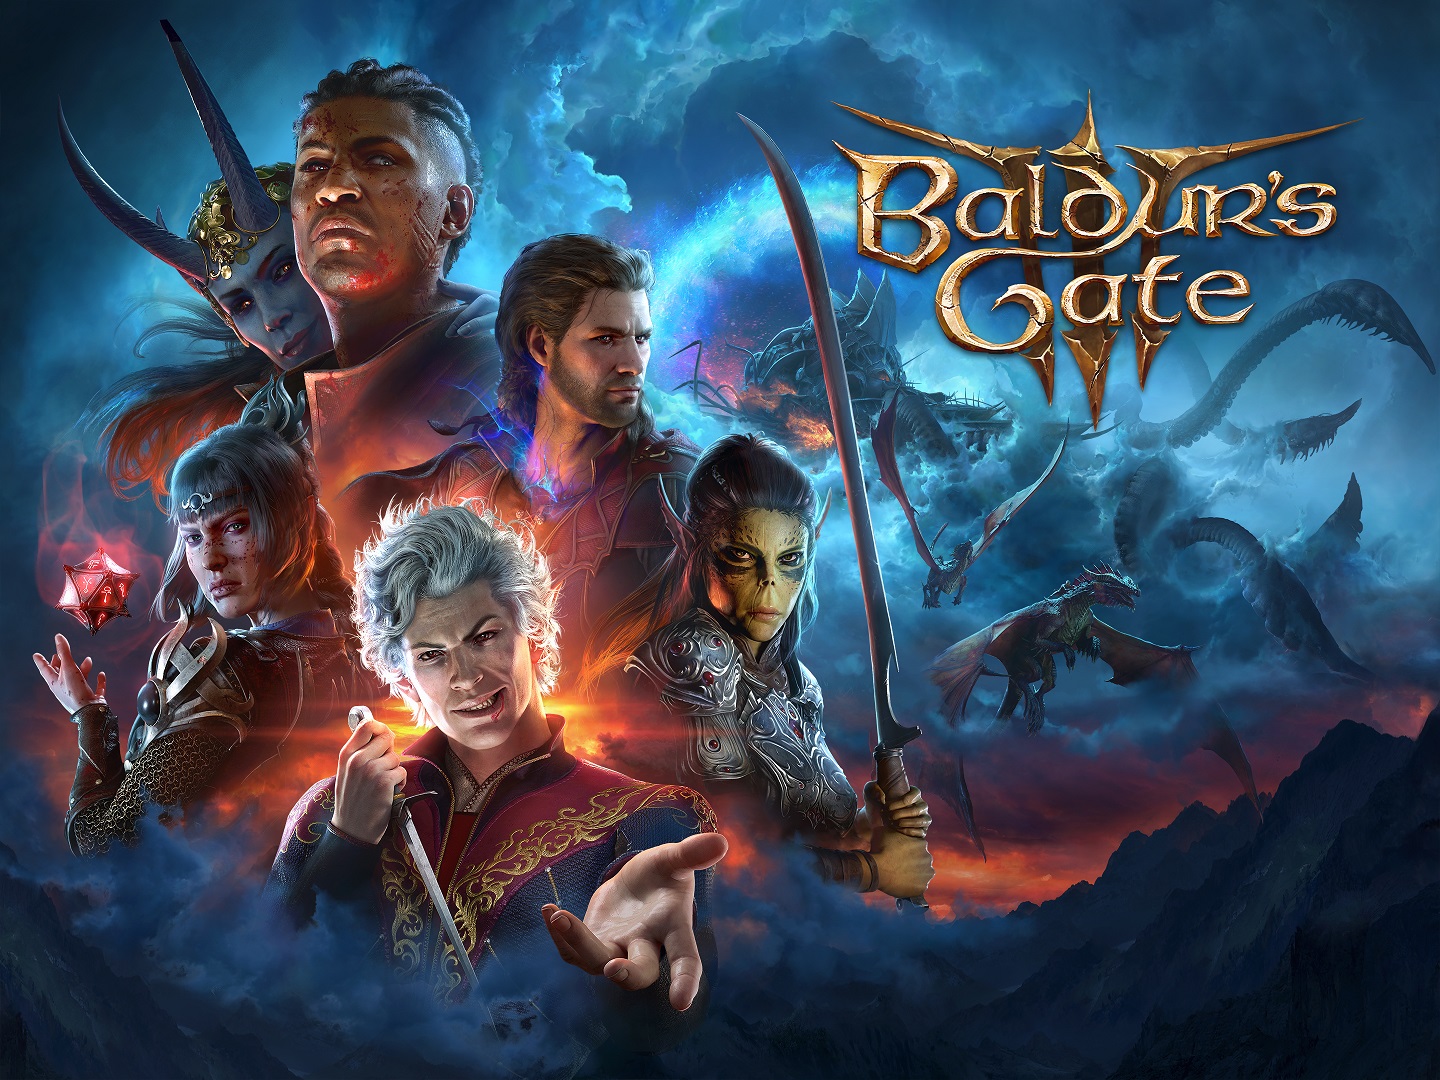 Baldur’s Gate 3 arriving a month early on PC, with over 170 hours of cinematics